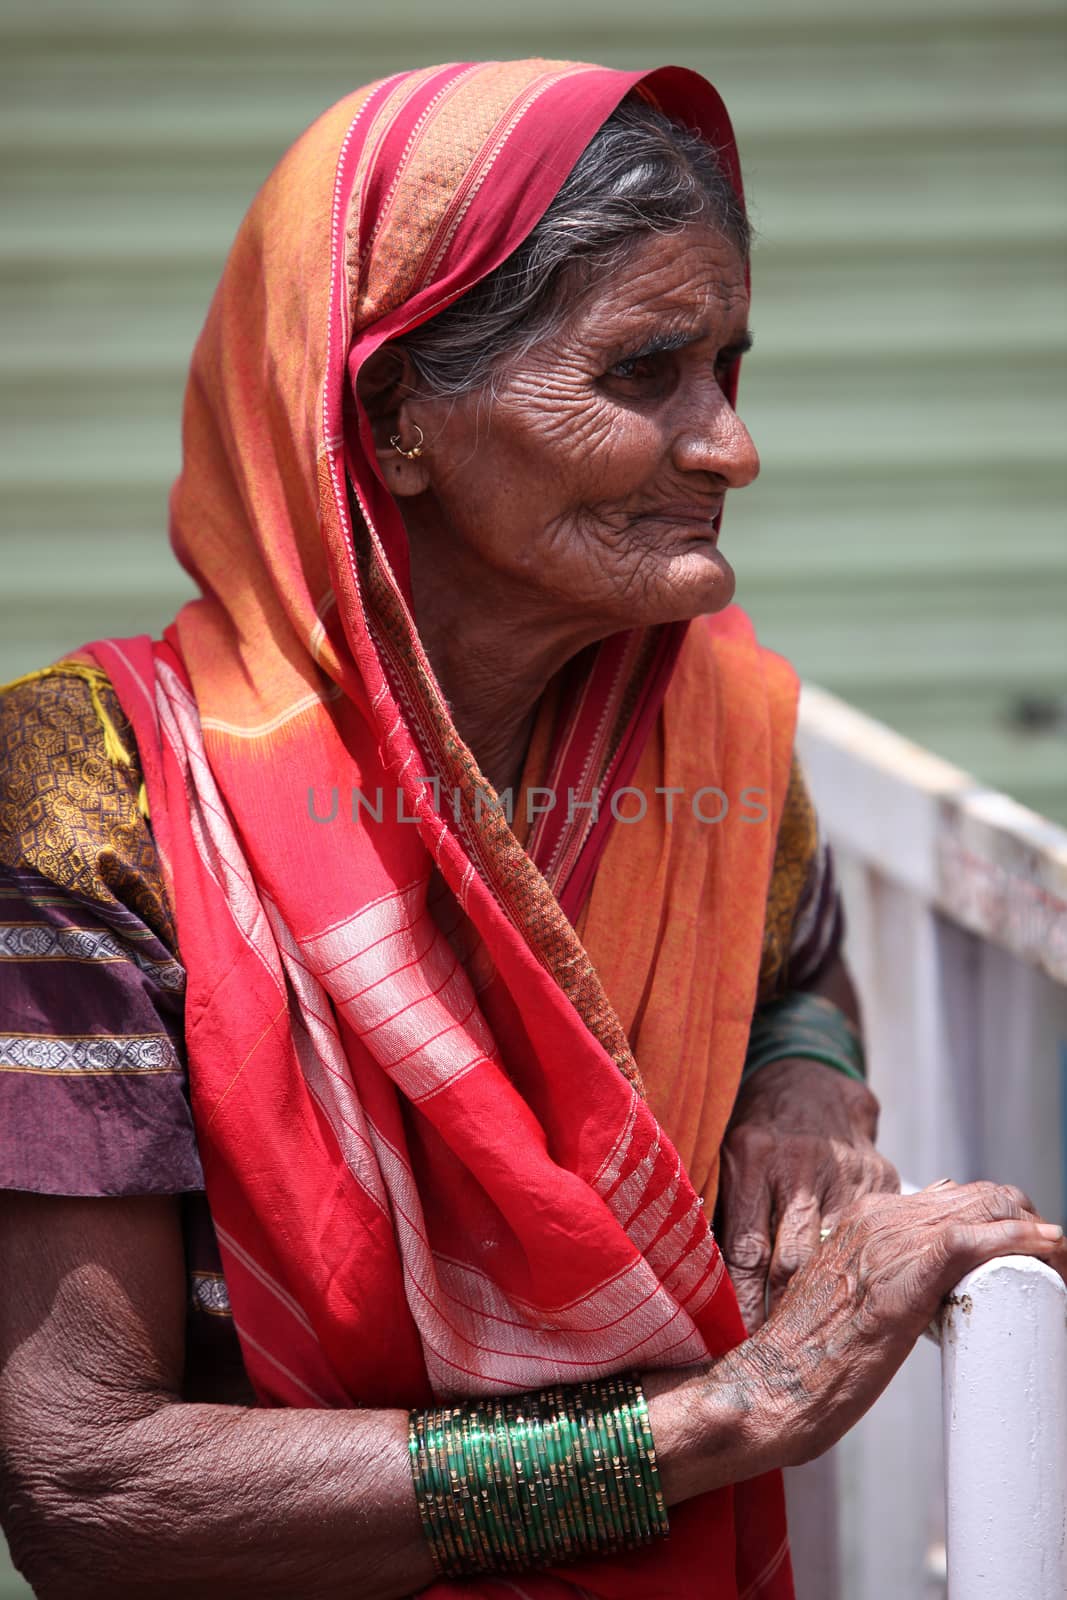 Pune, India - July 11, 2015: A portrait of an old Indian woman who is a Hindu pilgrim, during the famous Wari pilgrimmage in India.